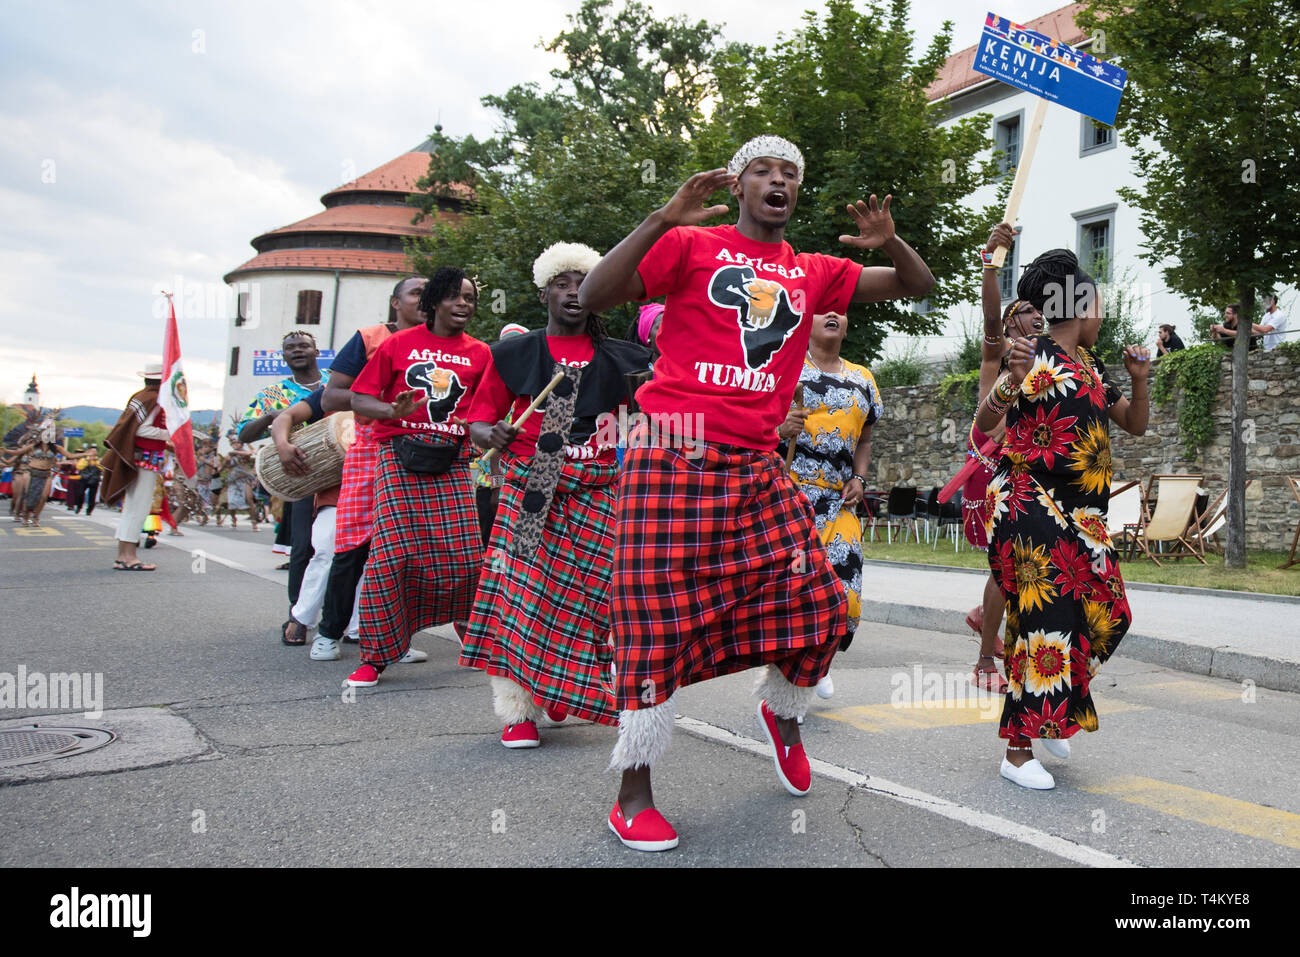 Members of African Tumbas from Nairobi, Kenya during the procession at 30th Folkart International CIOFF Folklore Festival, folklore sub-festival of Festival Lent, one of the largest outdoor festivals in Europe. Folkart, Festival Lent, Maribor, Slovenia, 2018. Stock Photo